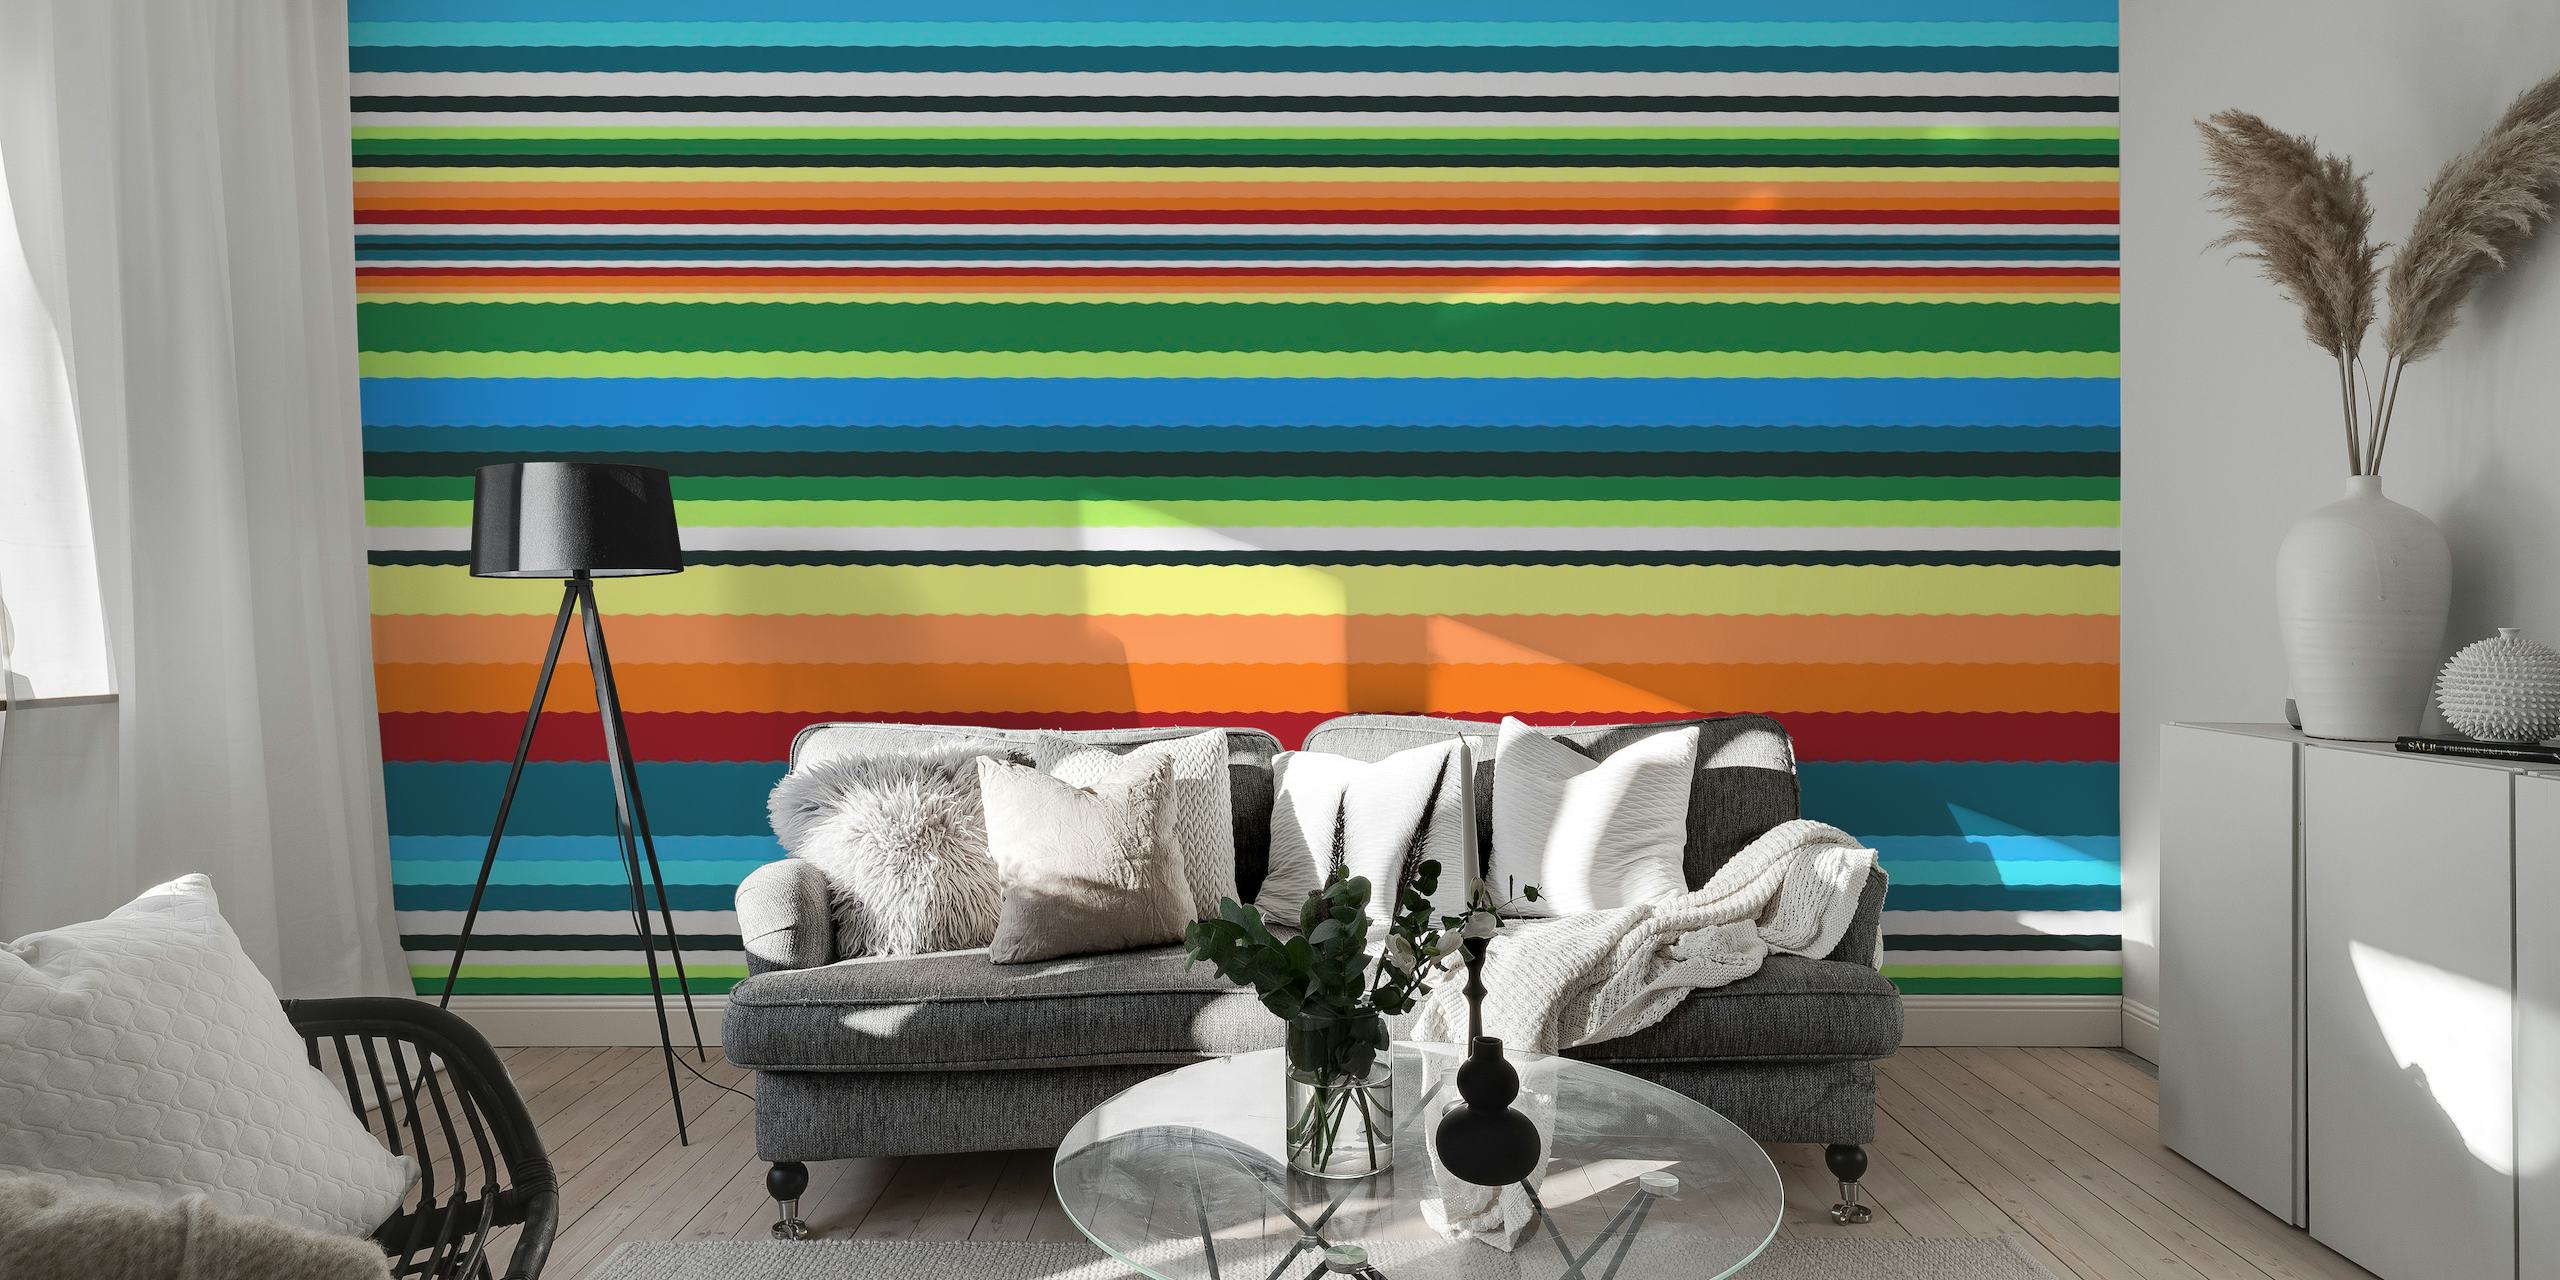 Colorful striped wall mural titled 'Bohemian Bright' with vibrant lines of various colors.